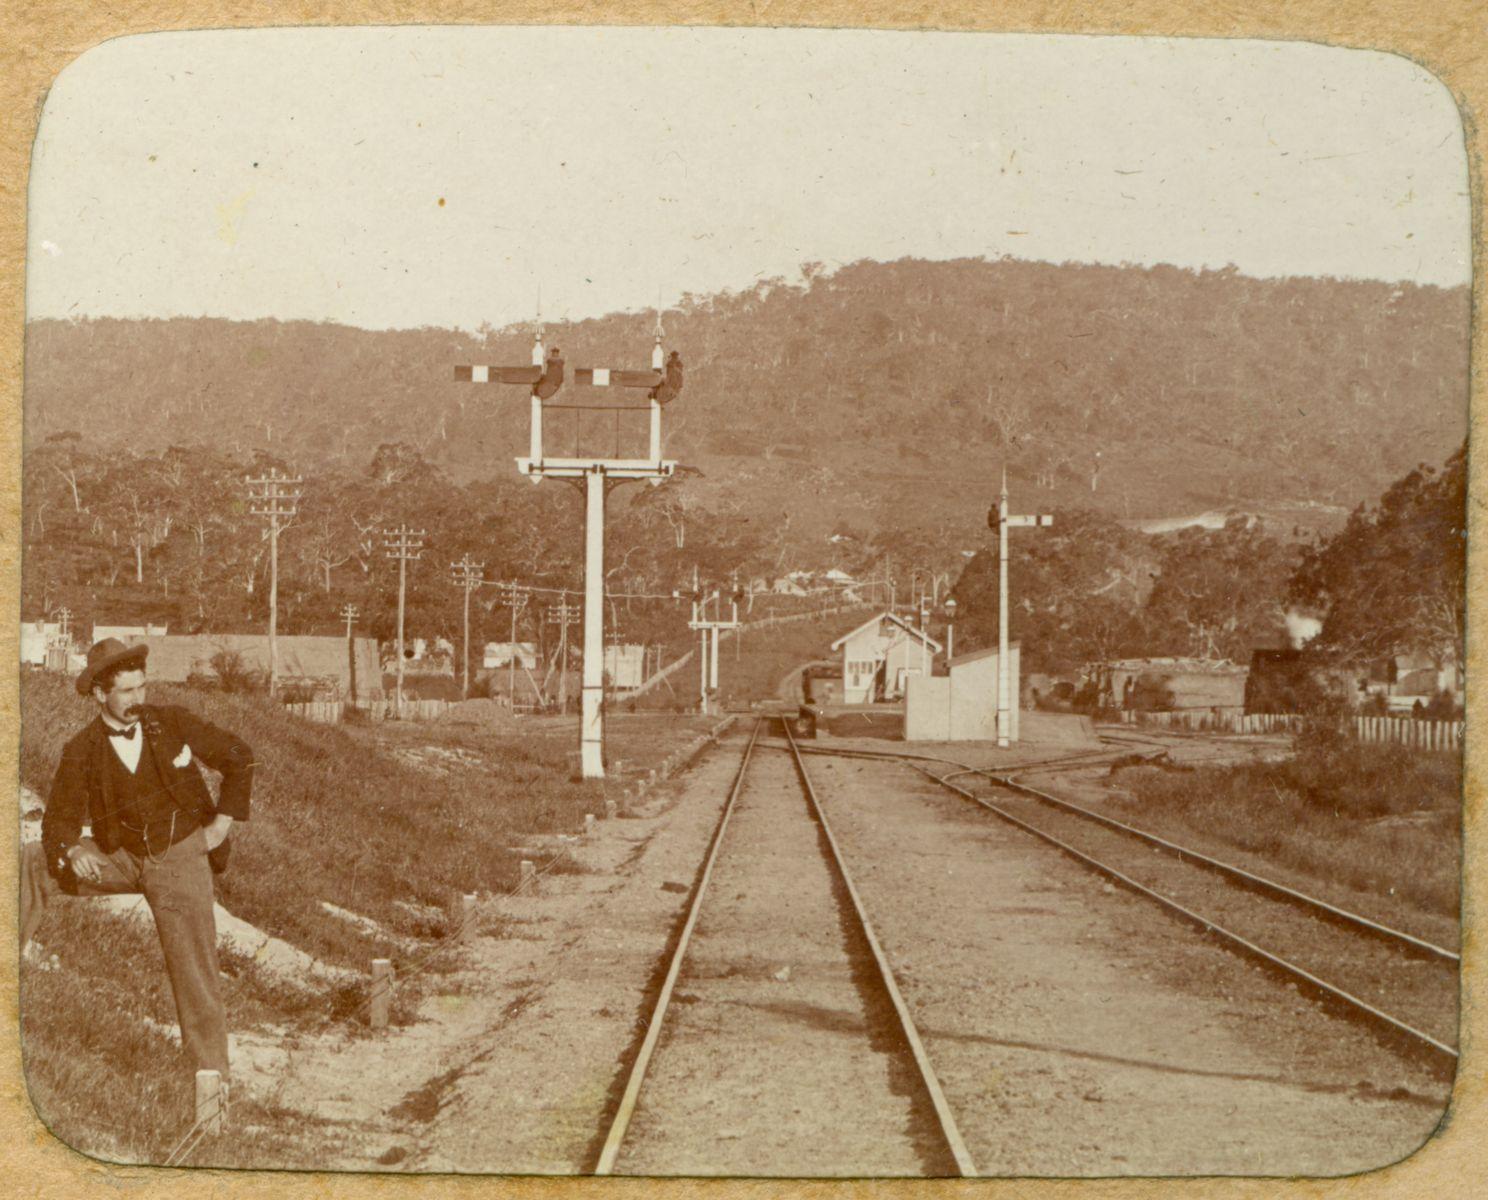 P100-09. Bellevue Railway Station viewed from the railway line to the west and looking east to the Perth hills. The man in the left of the image is photographer William Dennis Dawson.